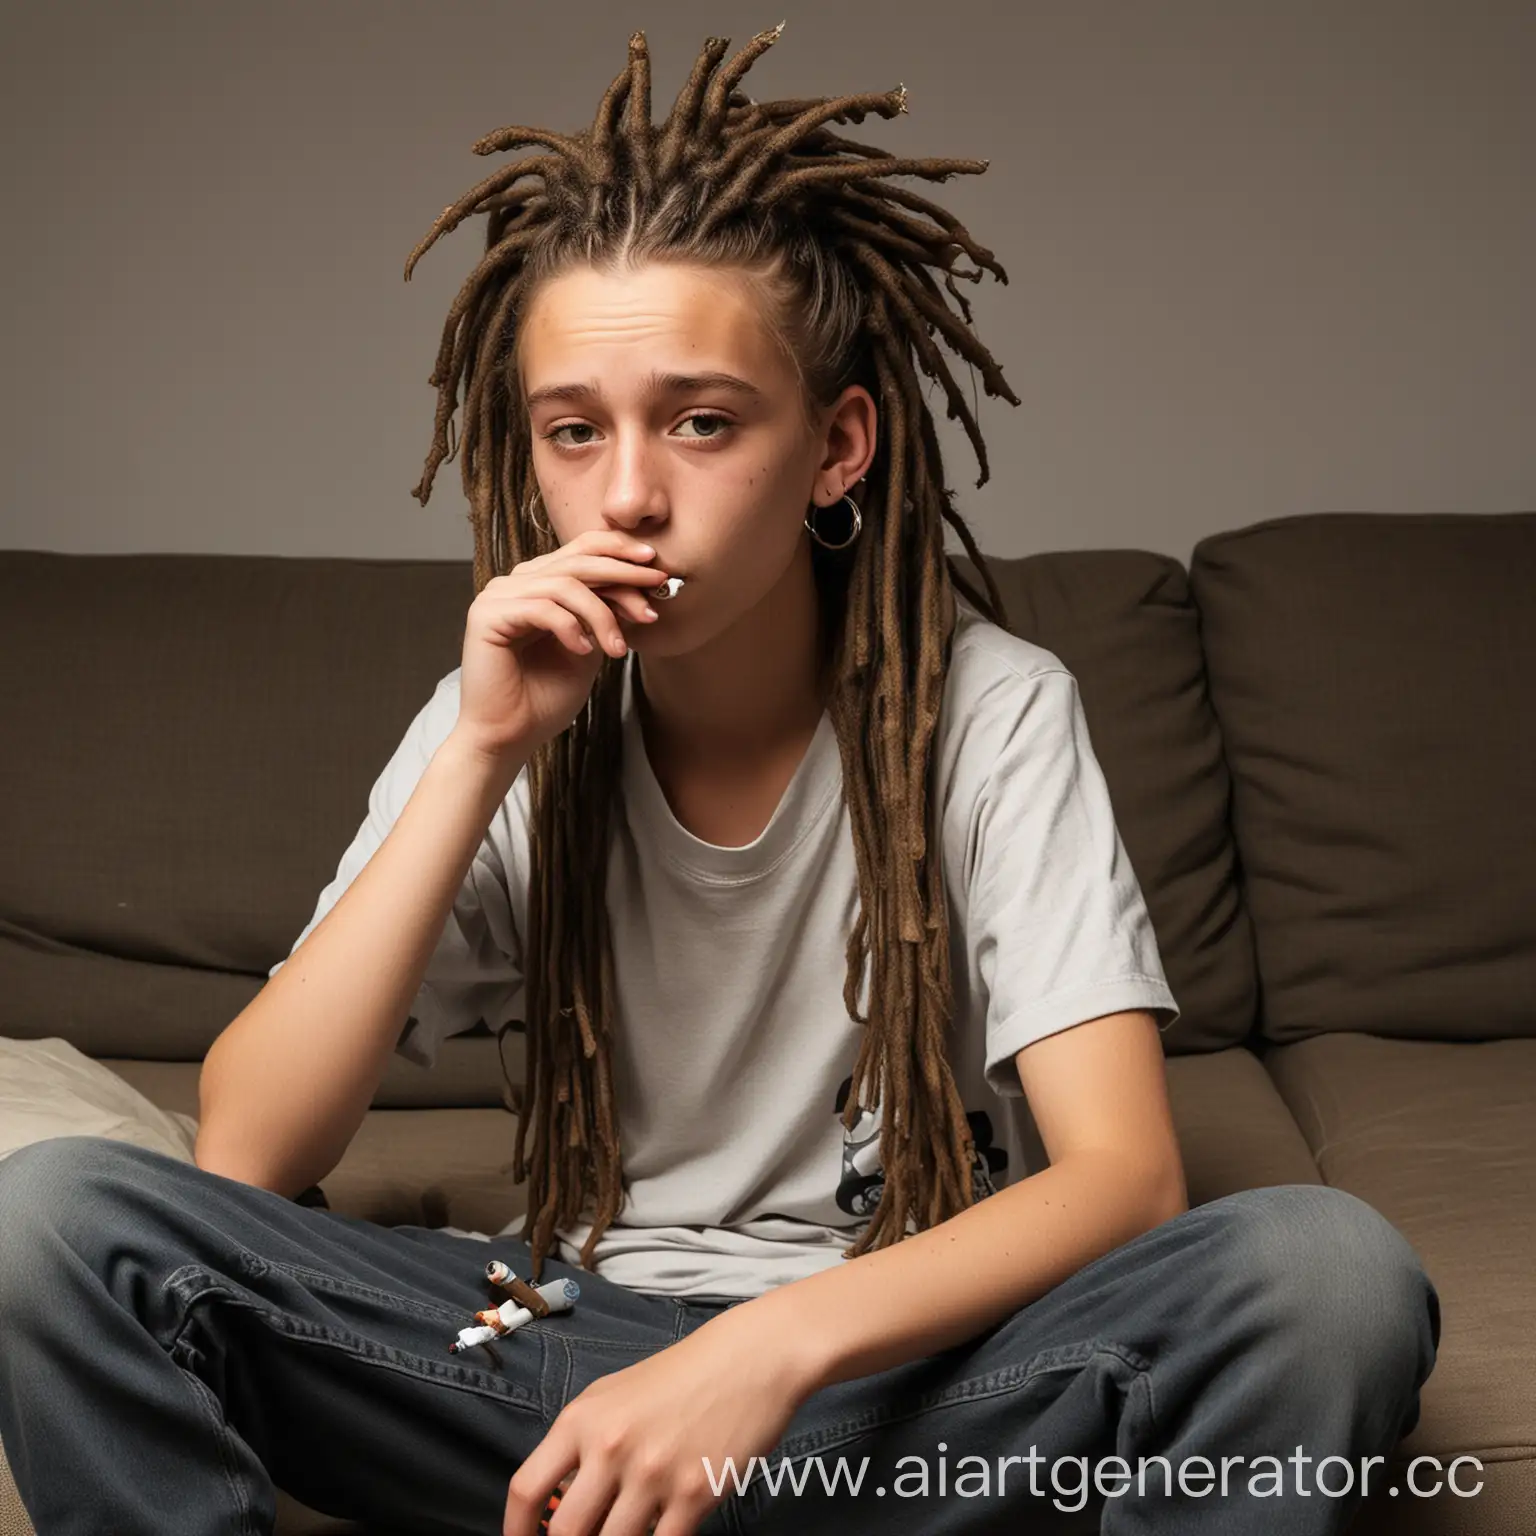 Teenage-Cartoon-Character-Age-15-Sitting-on-Couch-Smoking